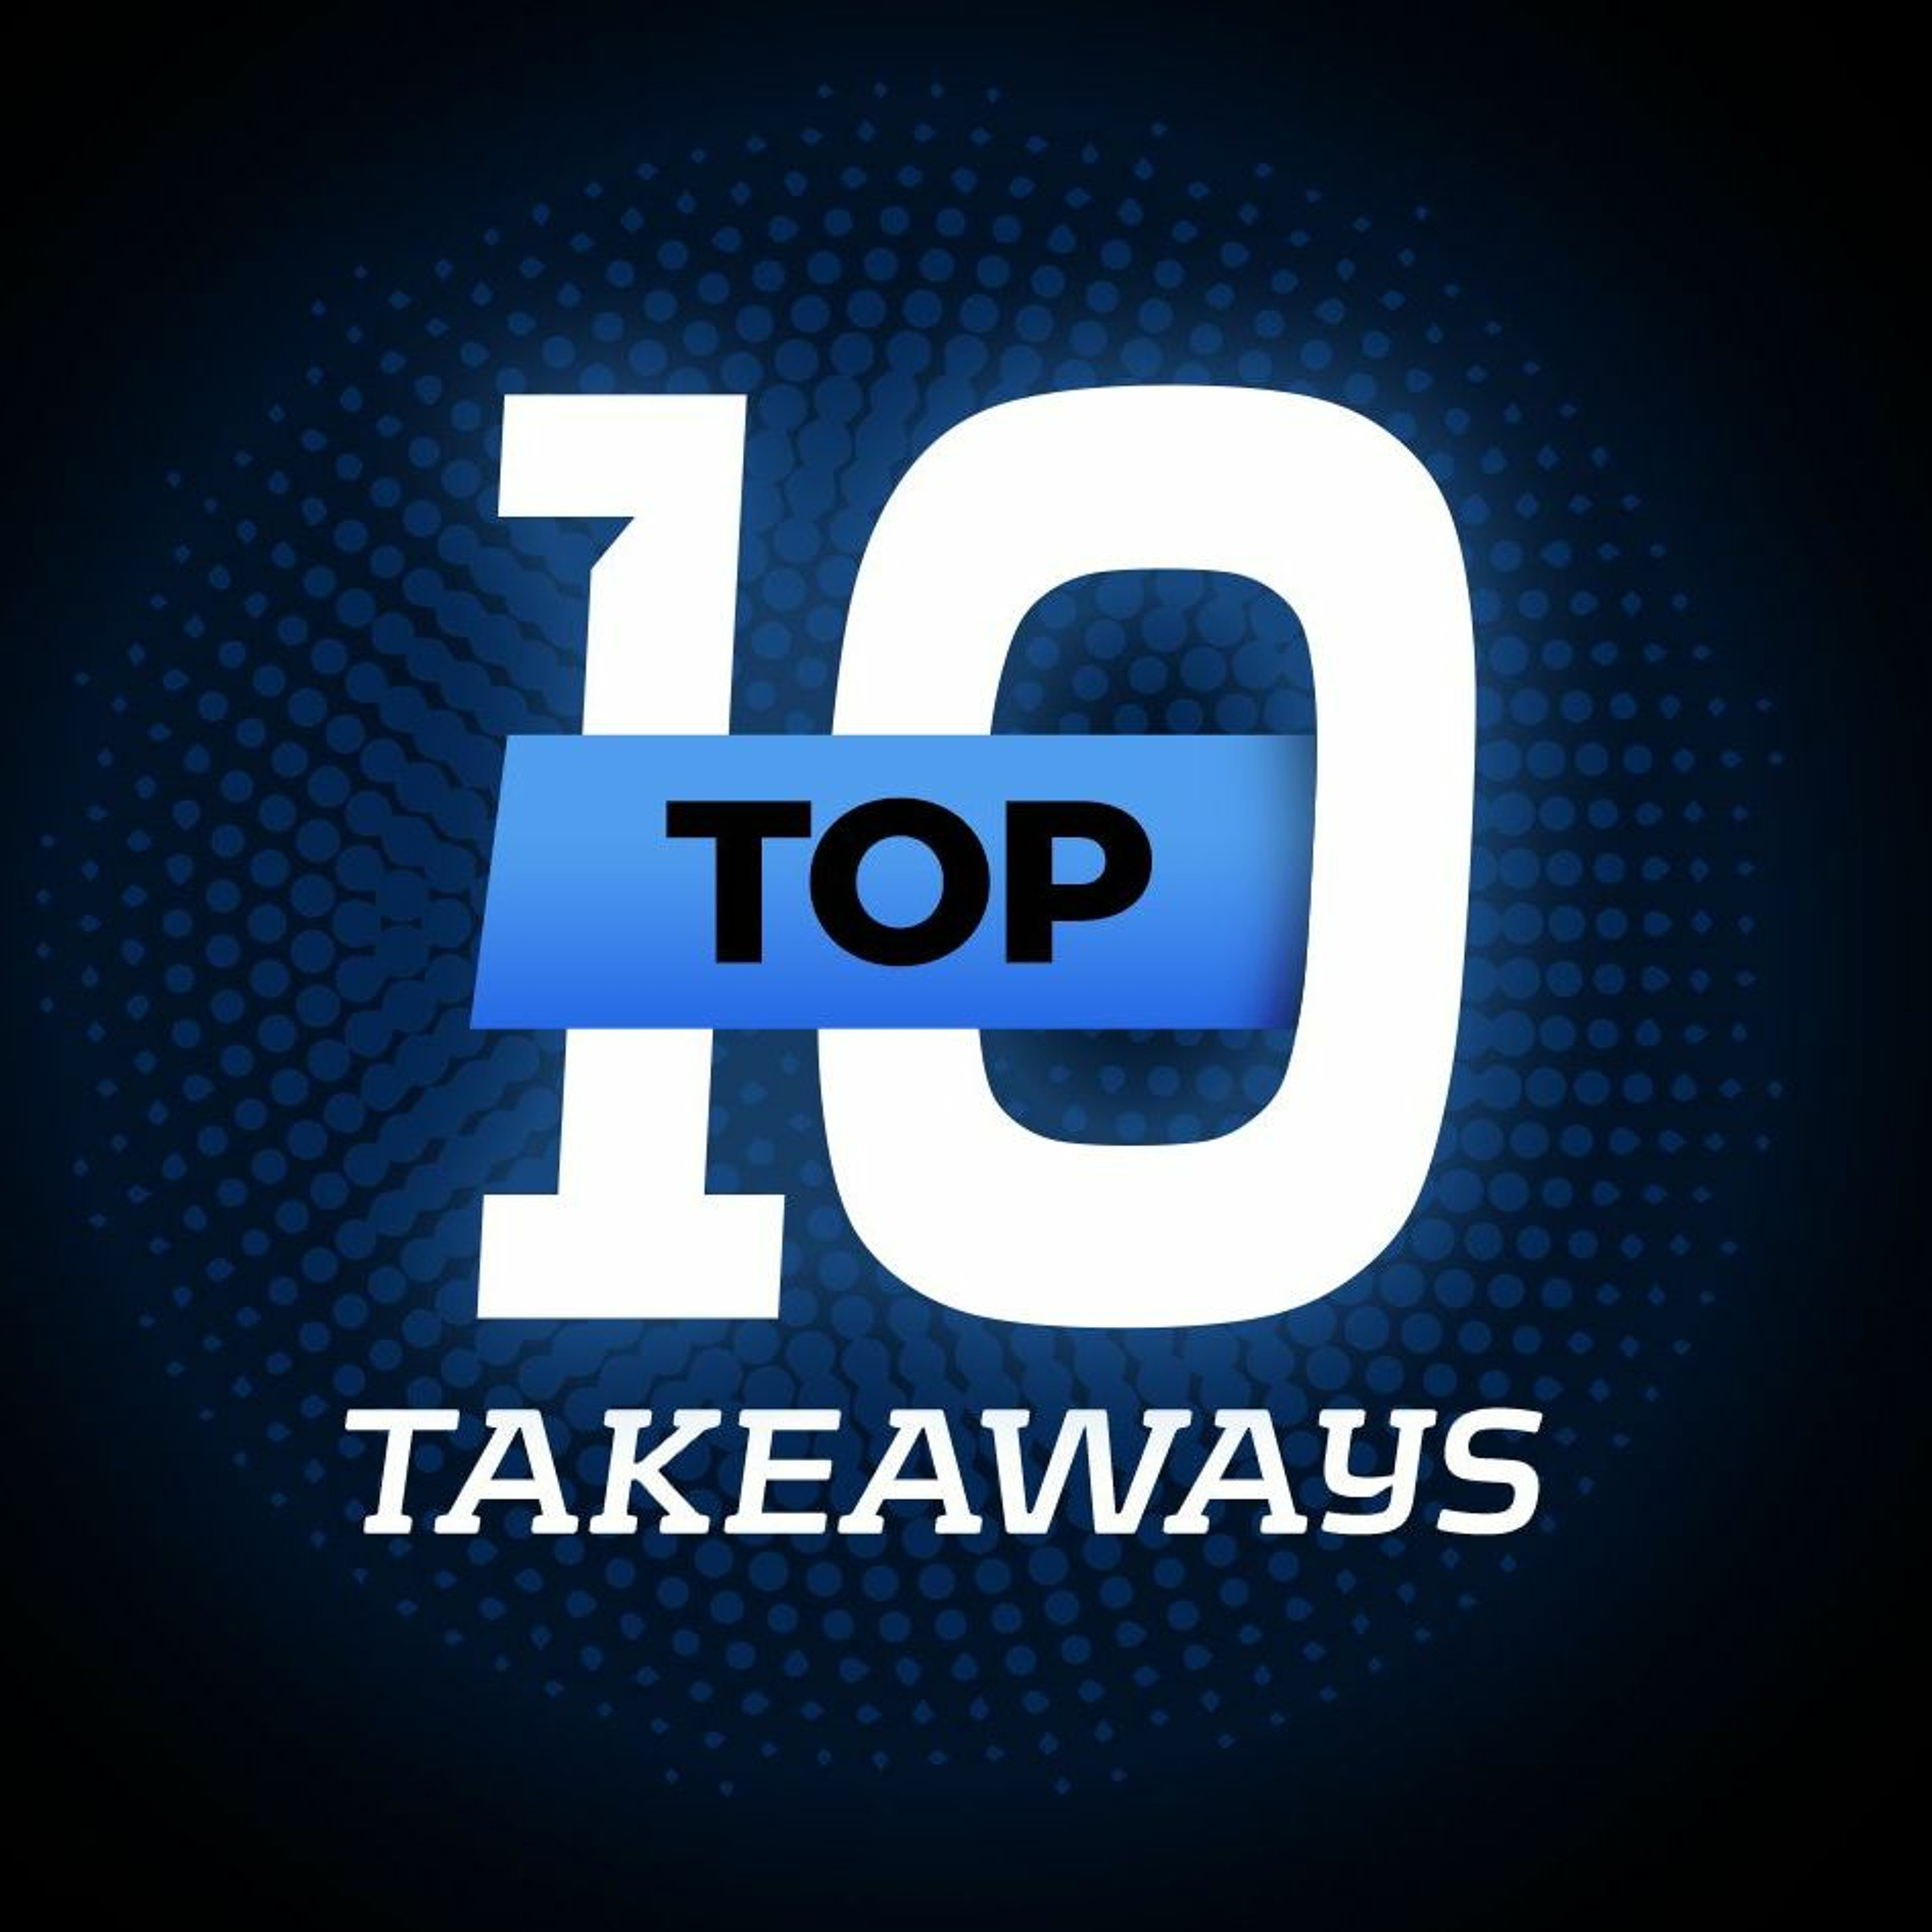 Top-10 Takeaways: Thursday Night Special